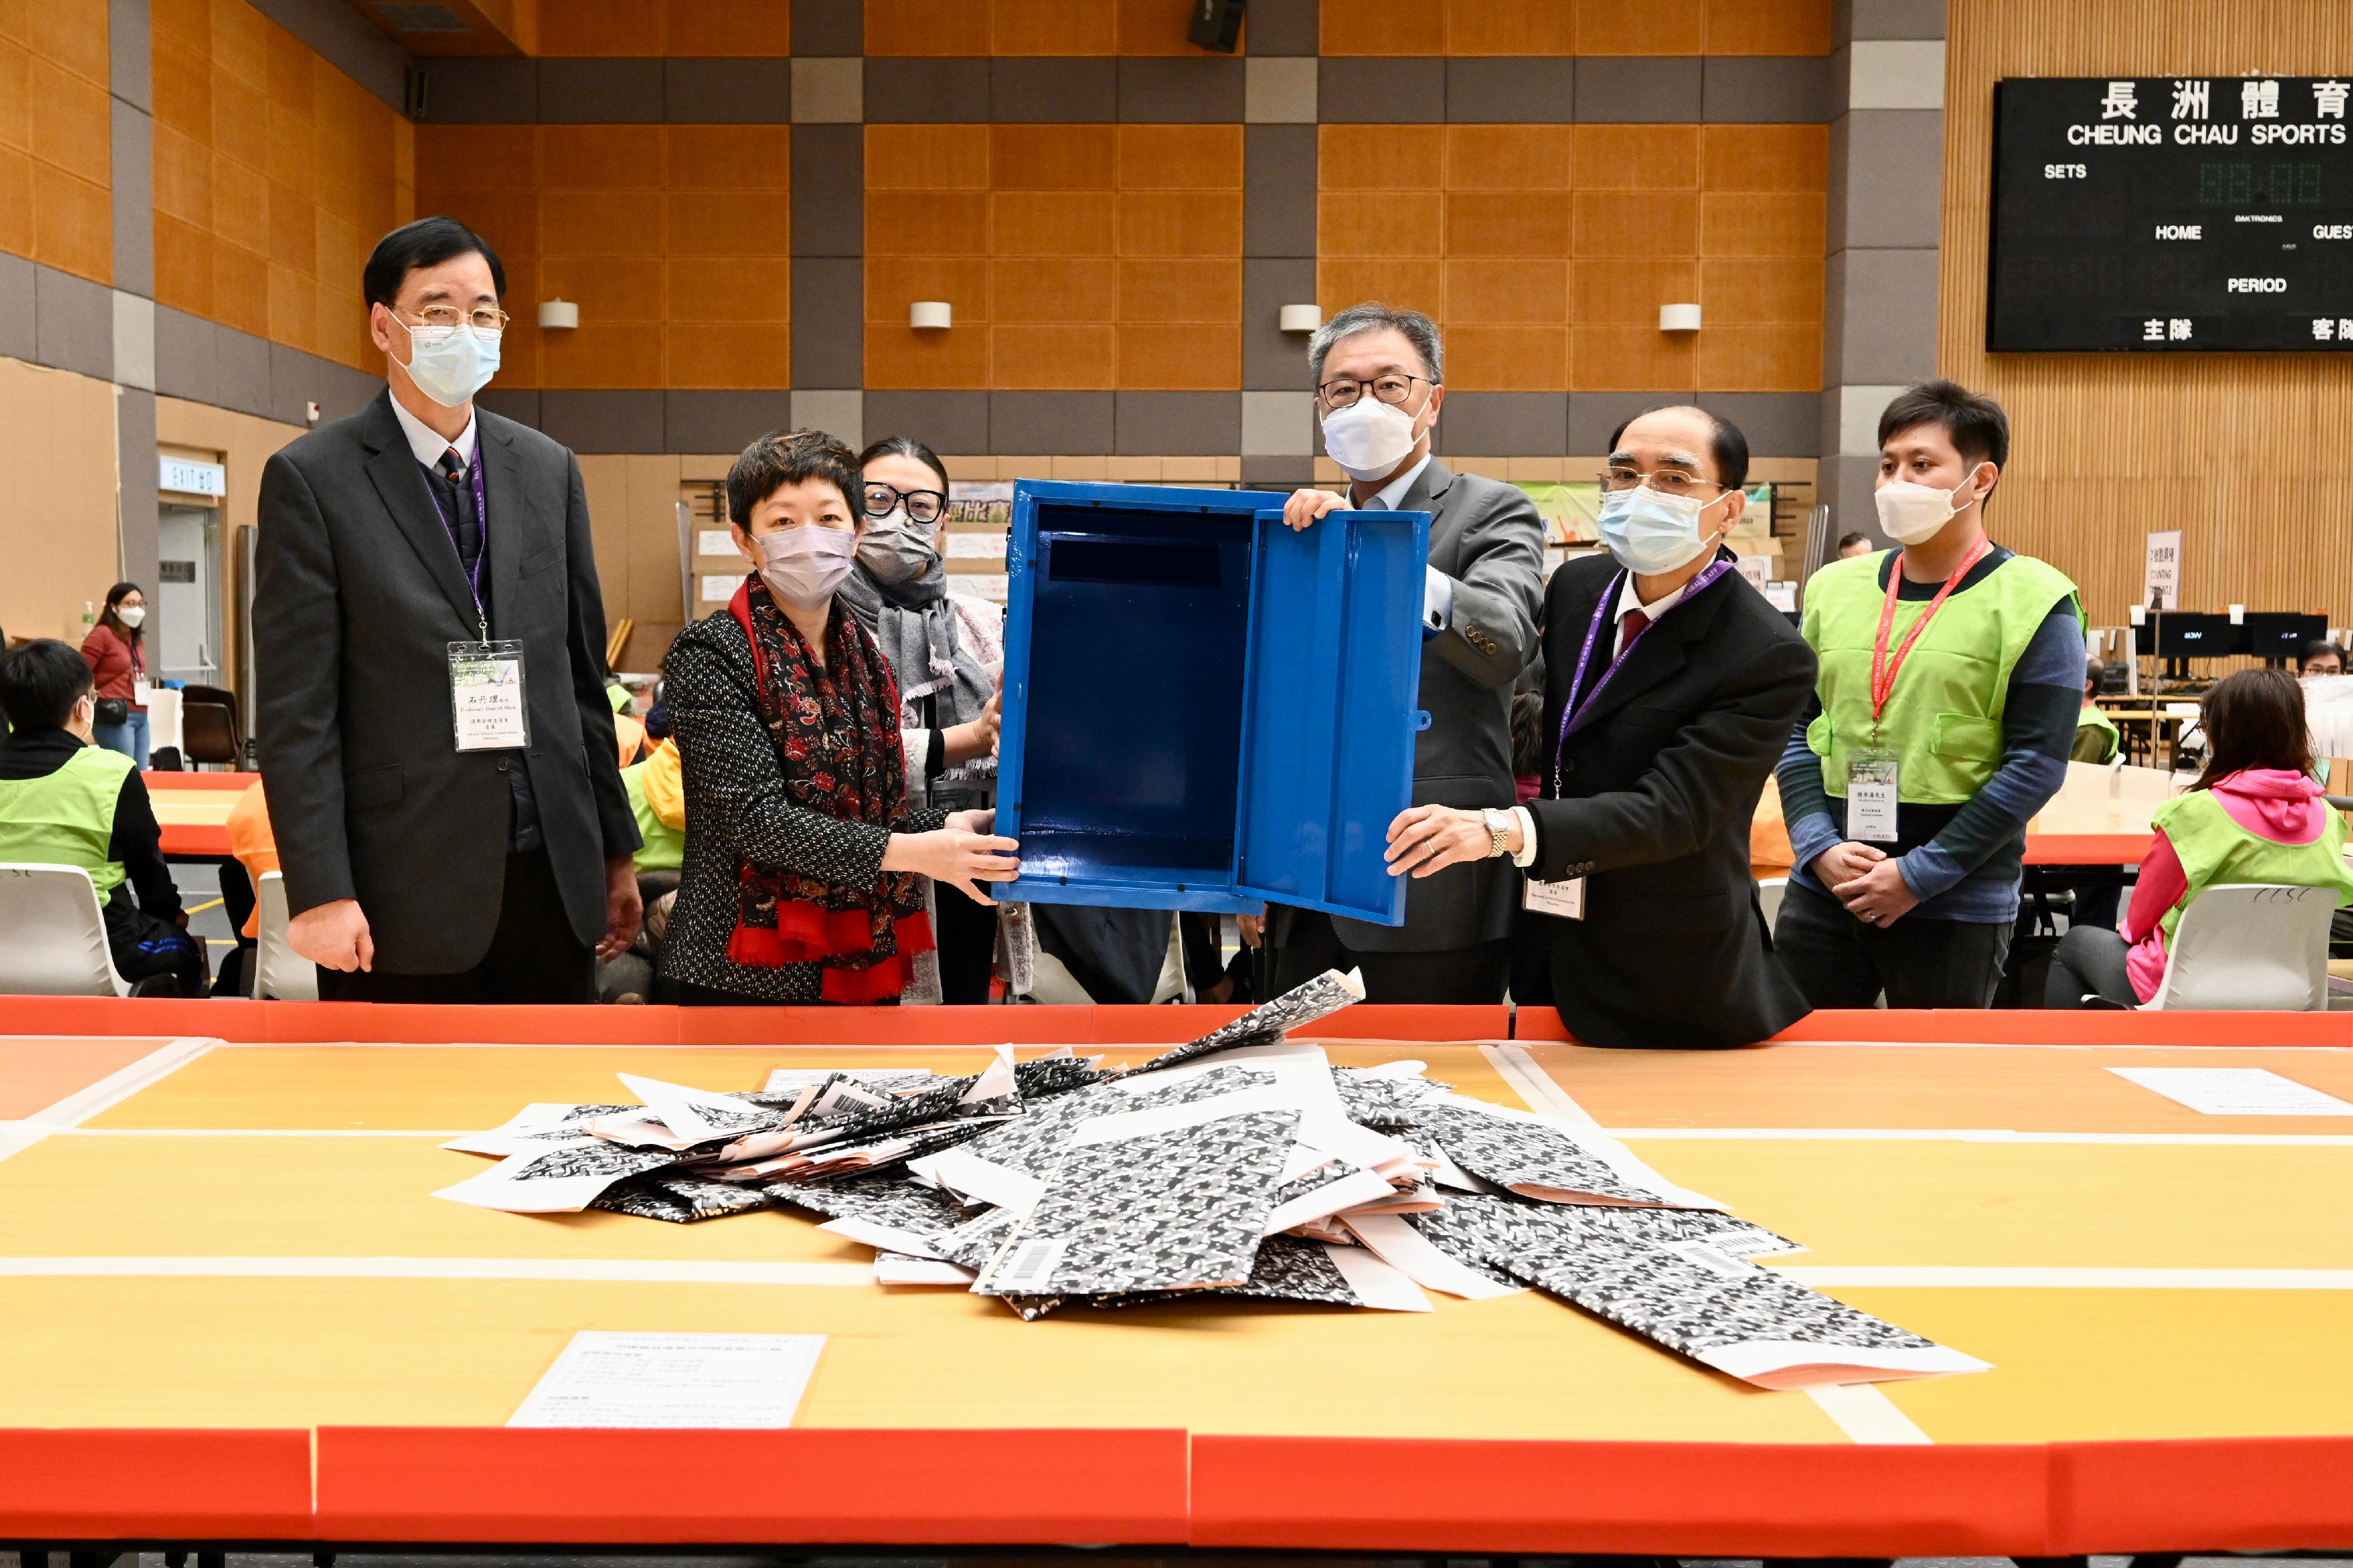 The Chairman of the Electoral Affairs Commission (EAC), Mr Justice David Lok (third right); EAC members Mr Arthur Luk, SC (second right), and Professor Daniel Shek (first left); and Deputy Director of Home Affairs Ms Eureka Cheung (second left) emptied a ballot box at the counting station of the Kaifong Representative Election in the 2023 Rural Ordinary Election at Cheung Chau Sports Centre today (January 15). 